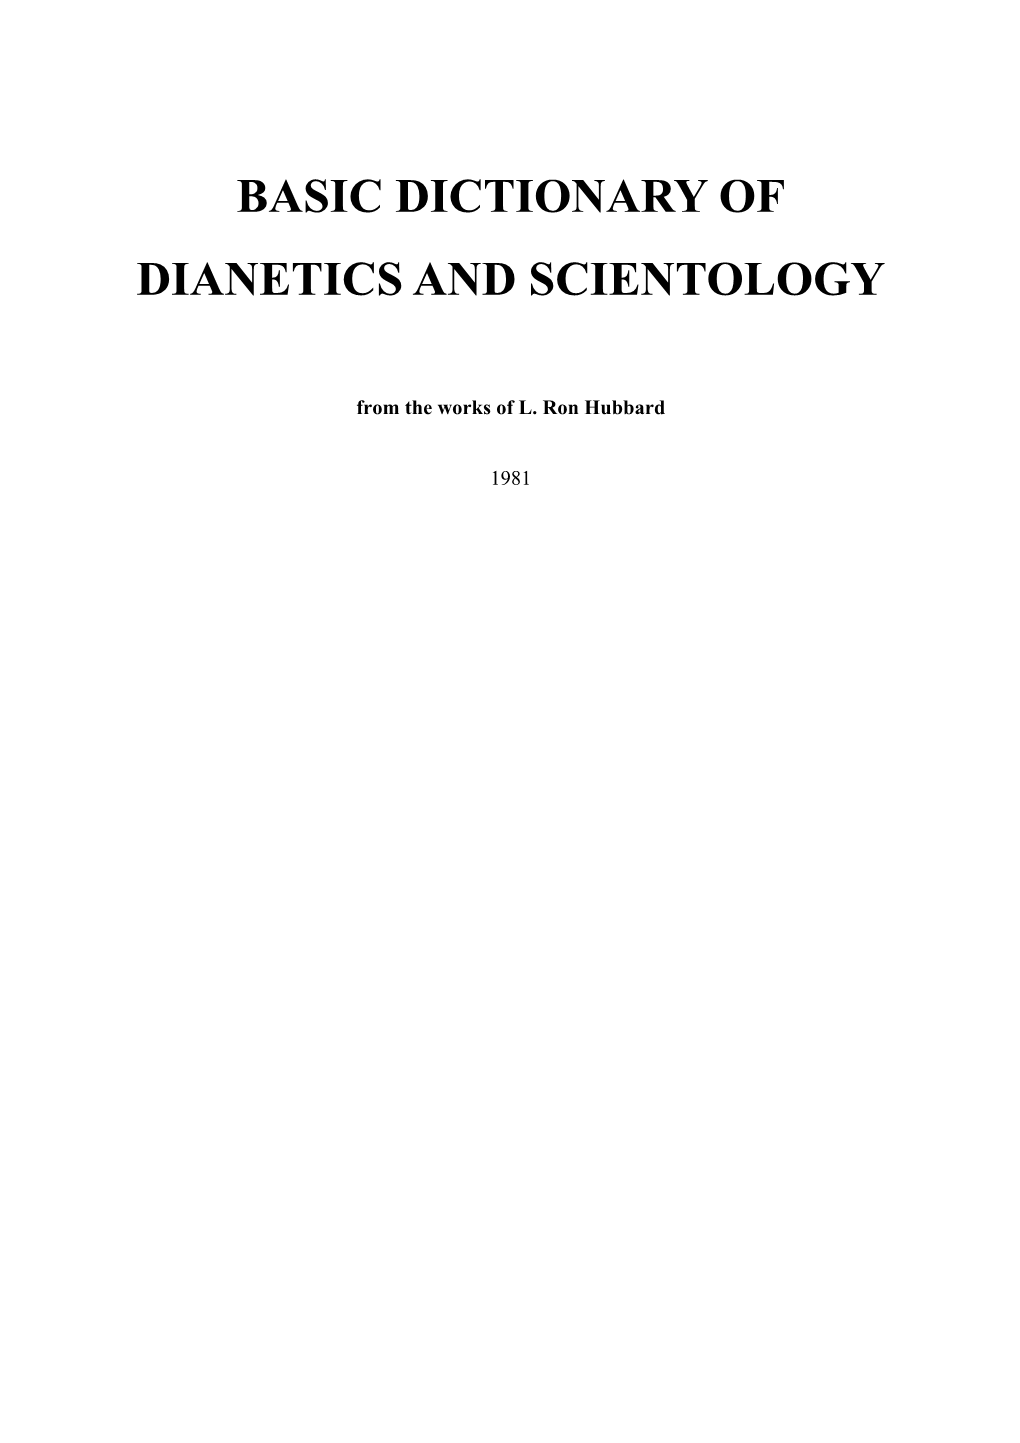 Basic Dictionary of Dianetics and Scientology